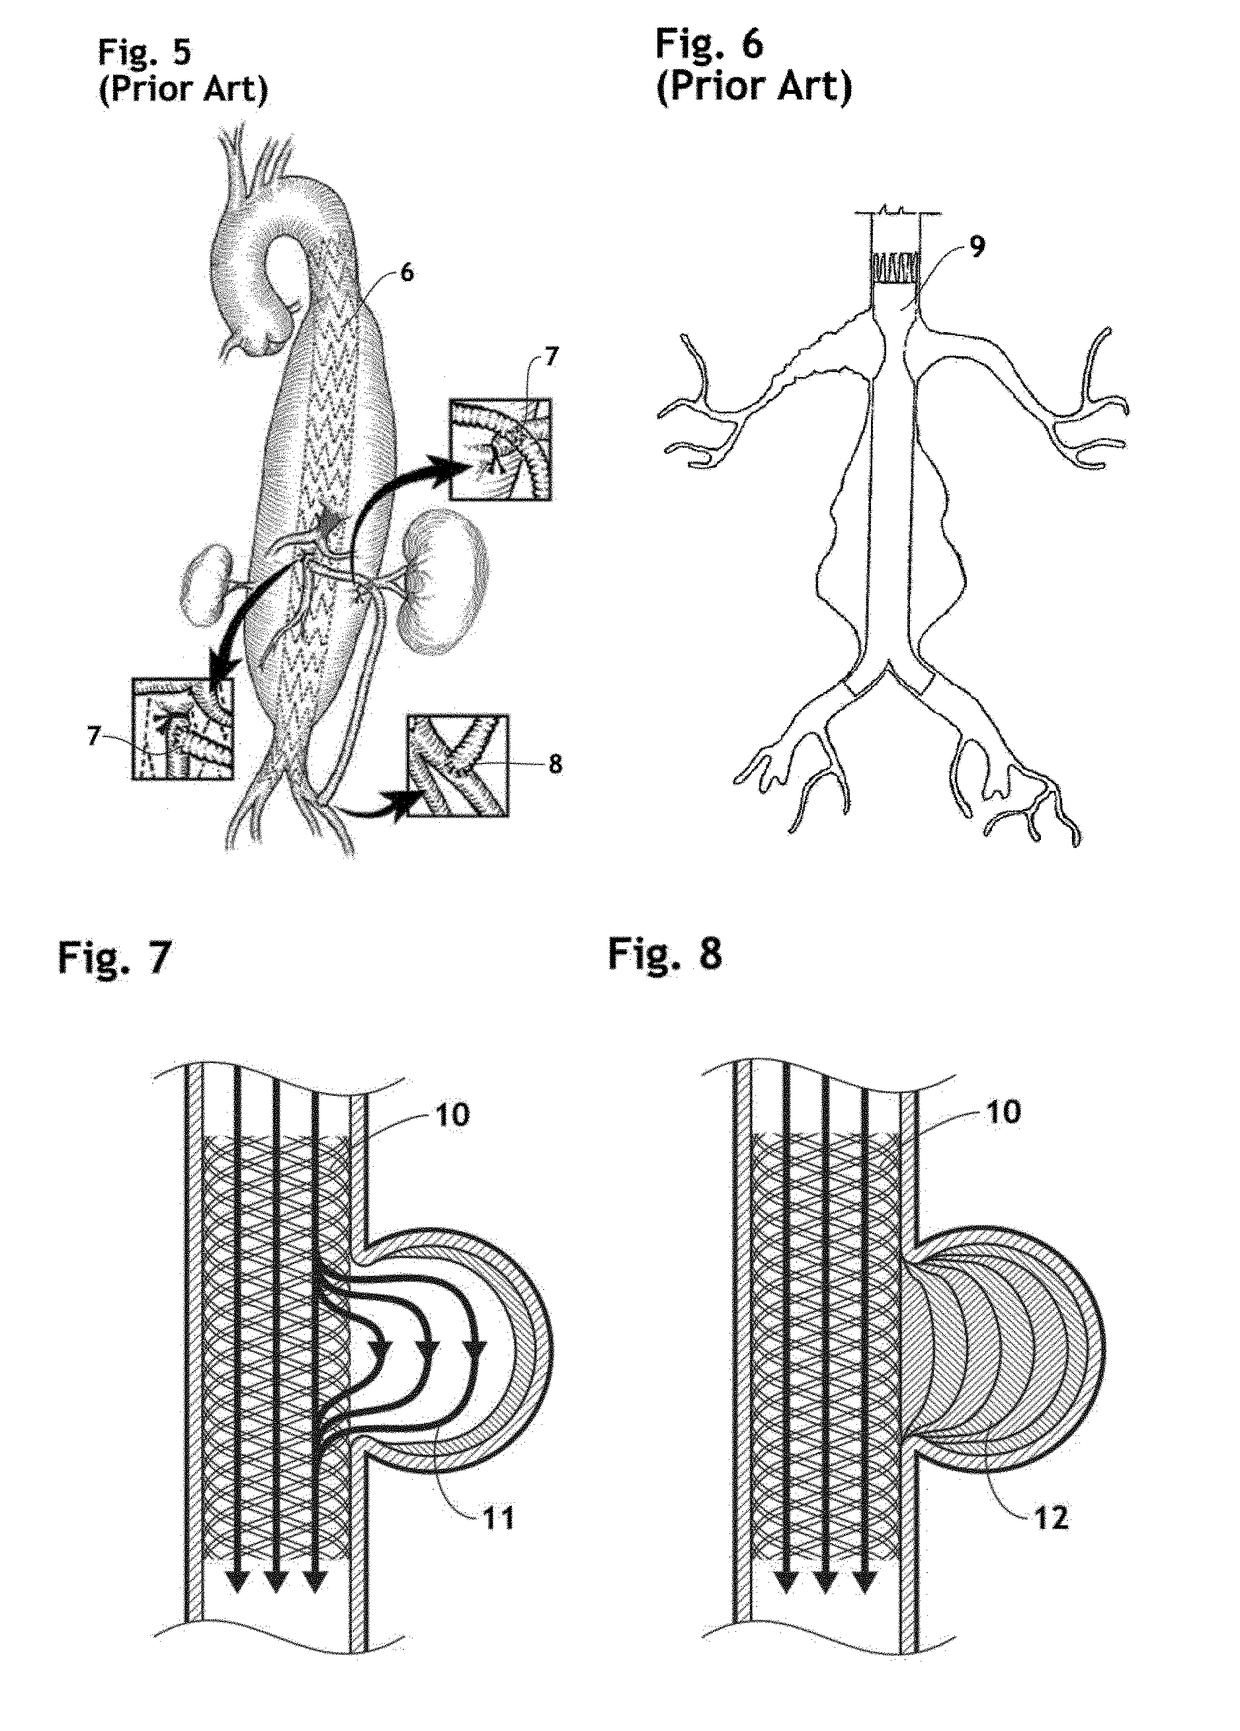 Stent assembly for thoracoabdominal bifurcated aneurysm repair